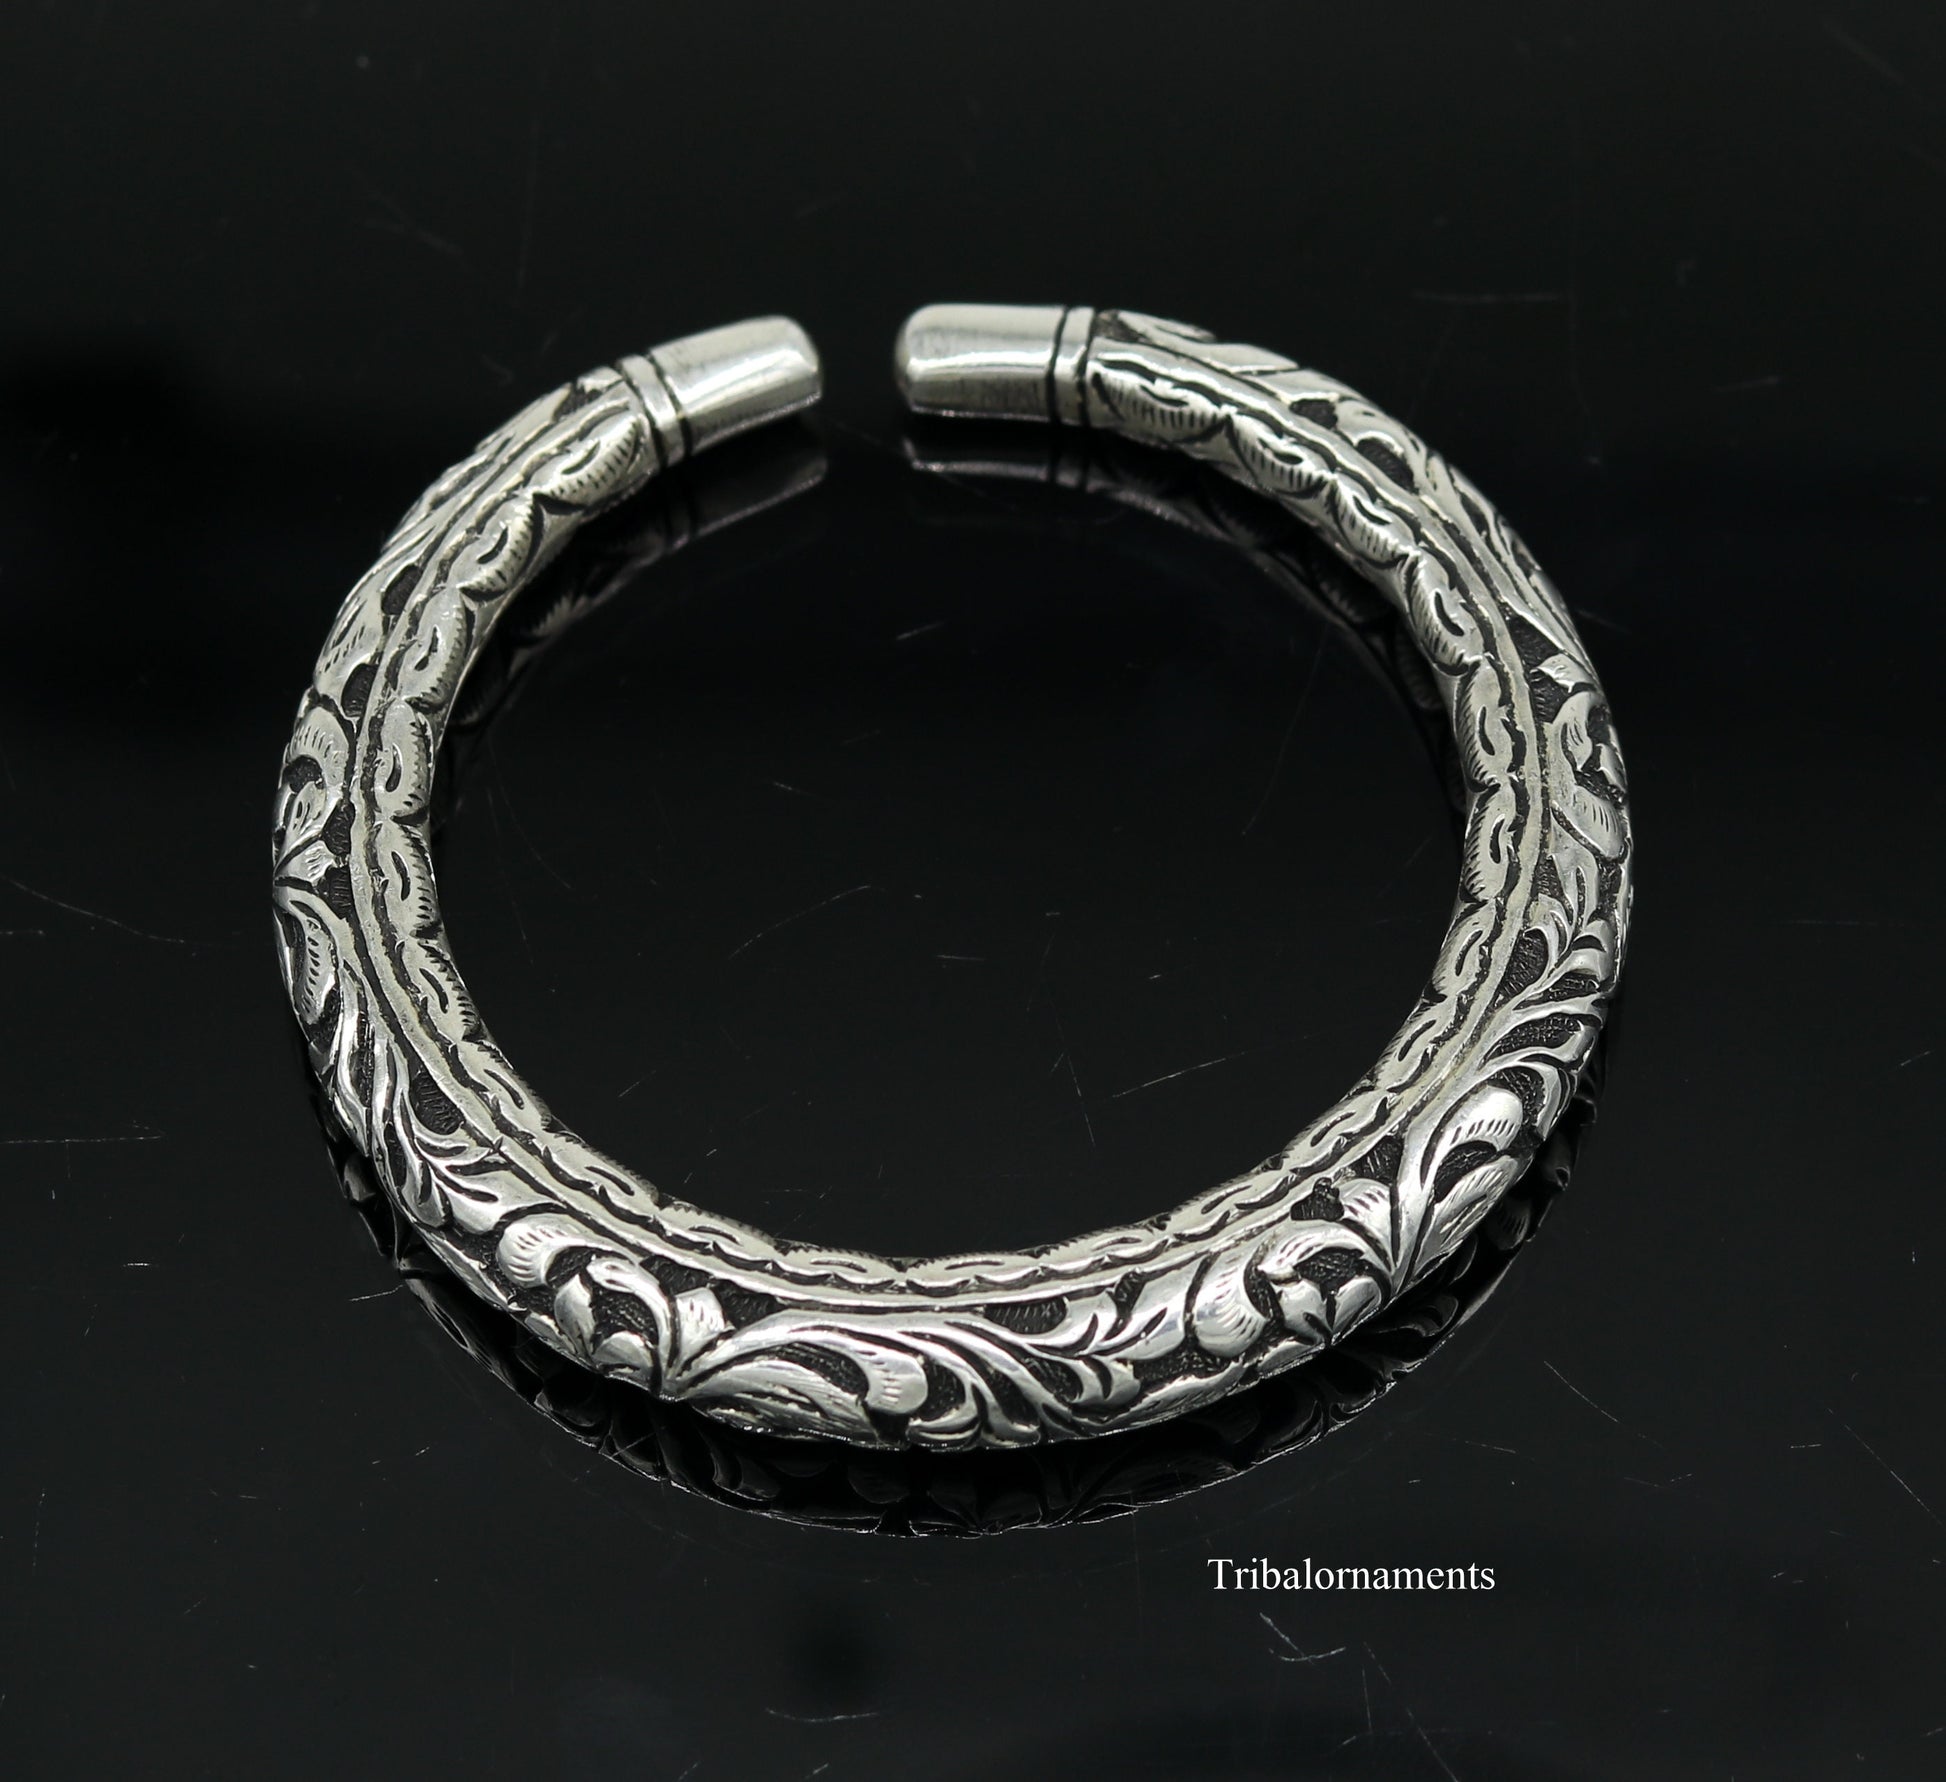 925 Sterling silver handcrafted chitai work customized oxidized stylish vintage design excellent bangle bracelet kada tribal jewelry nsk439 - TRIBAL ORNAMENTS